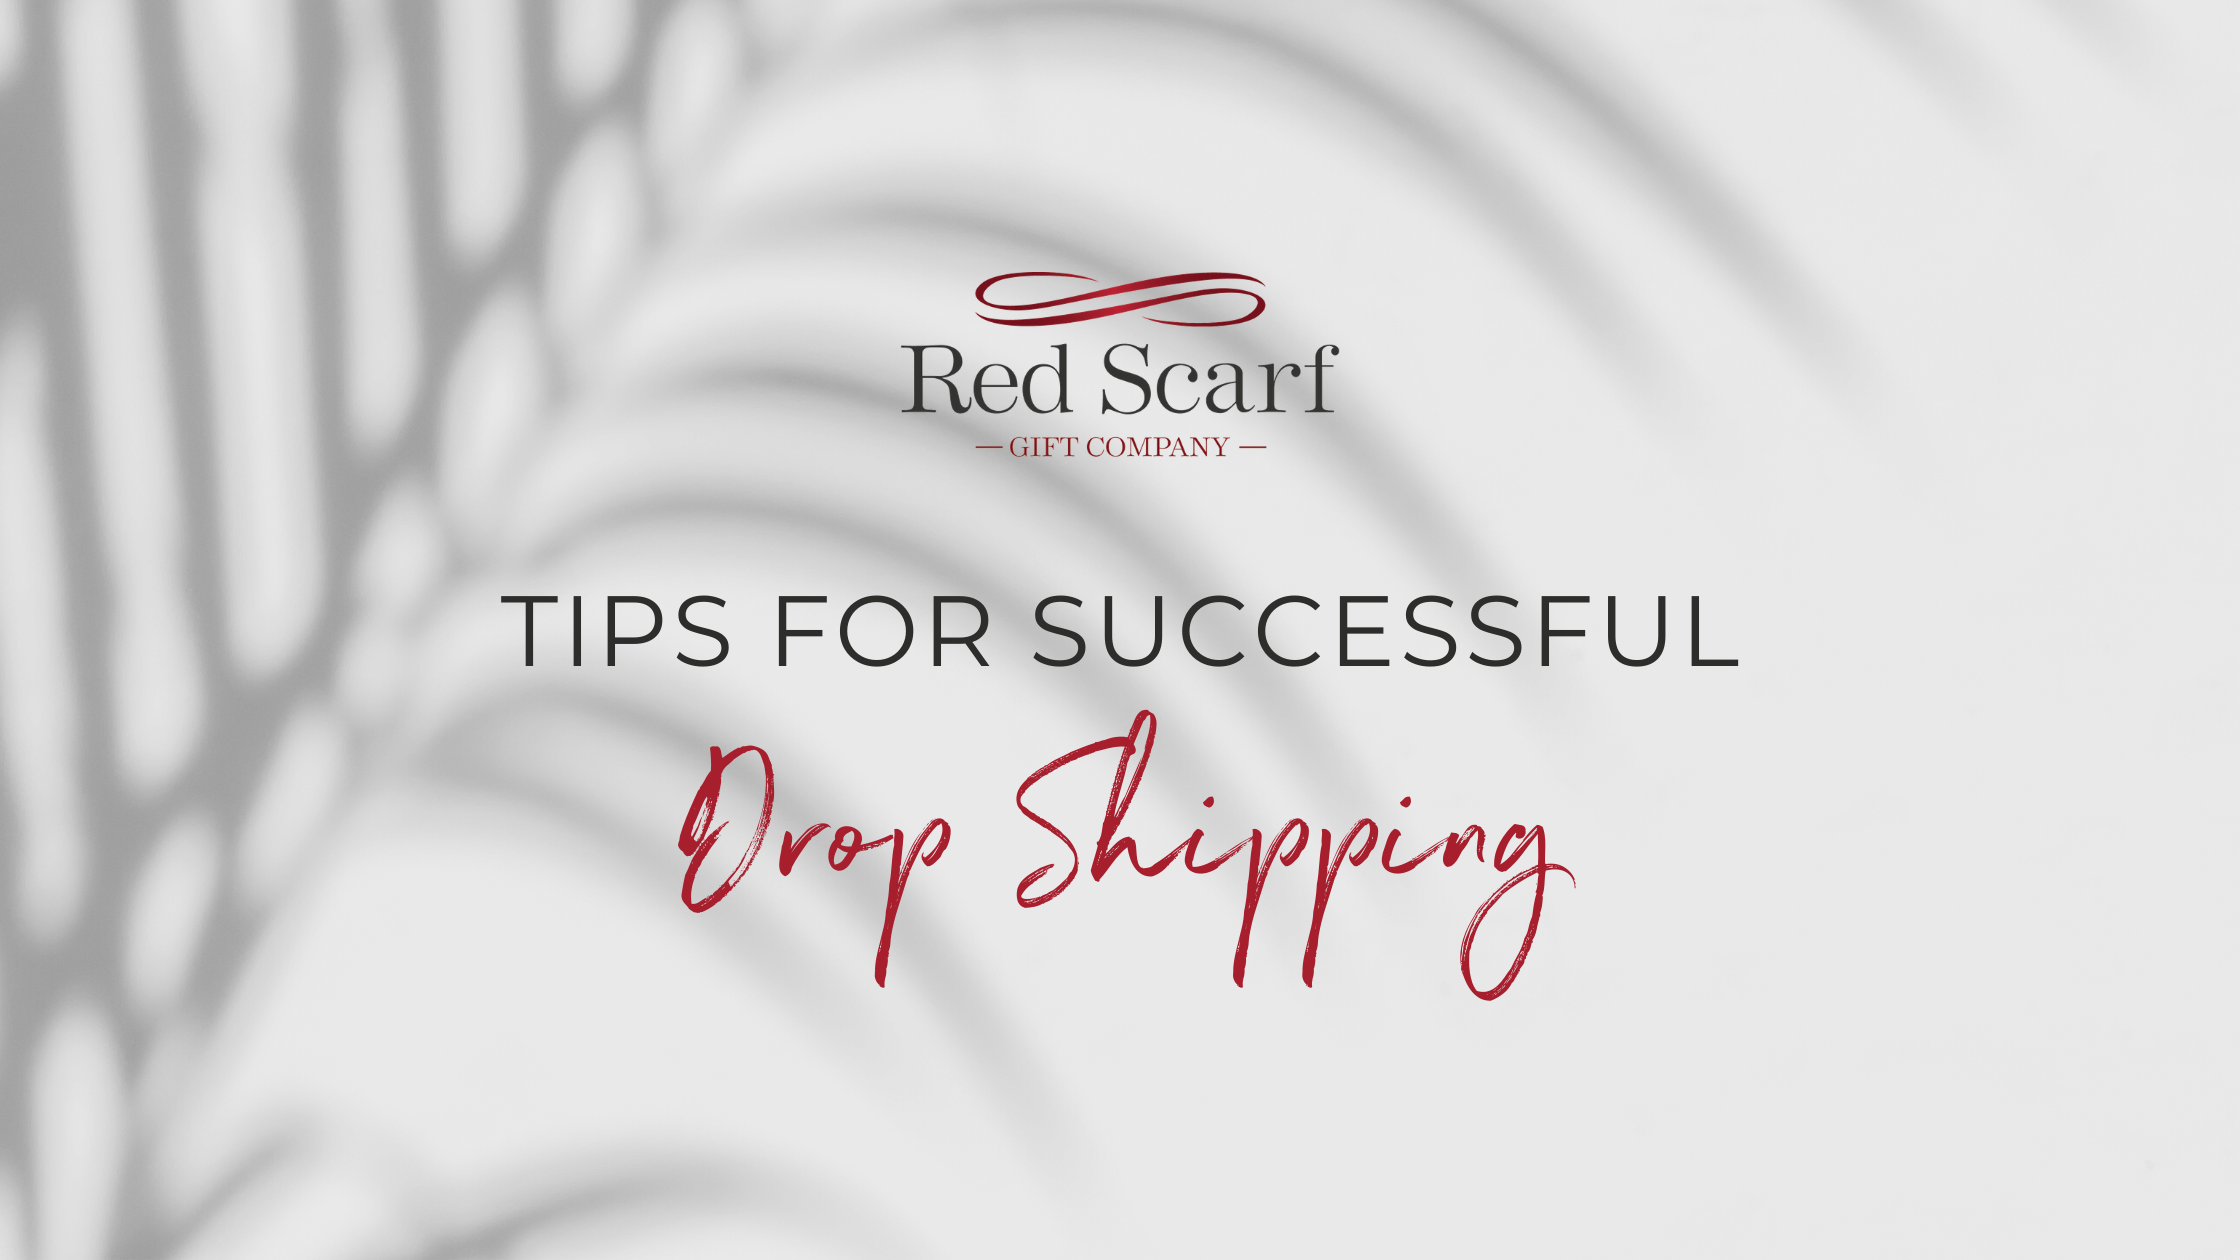 Tips for Successful Drop Shipping